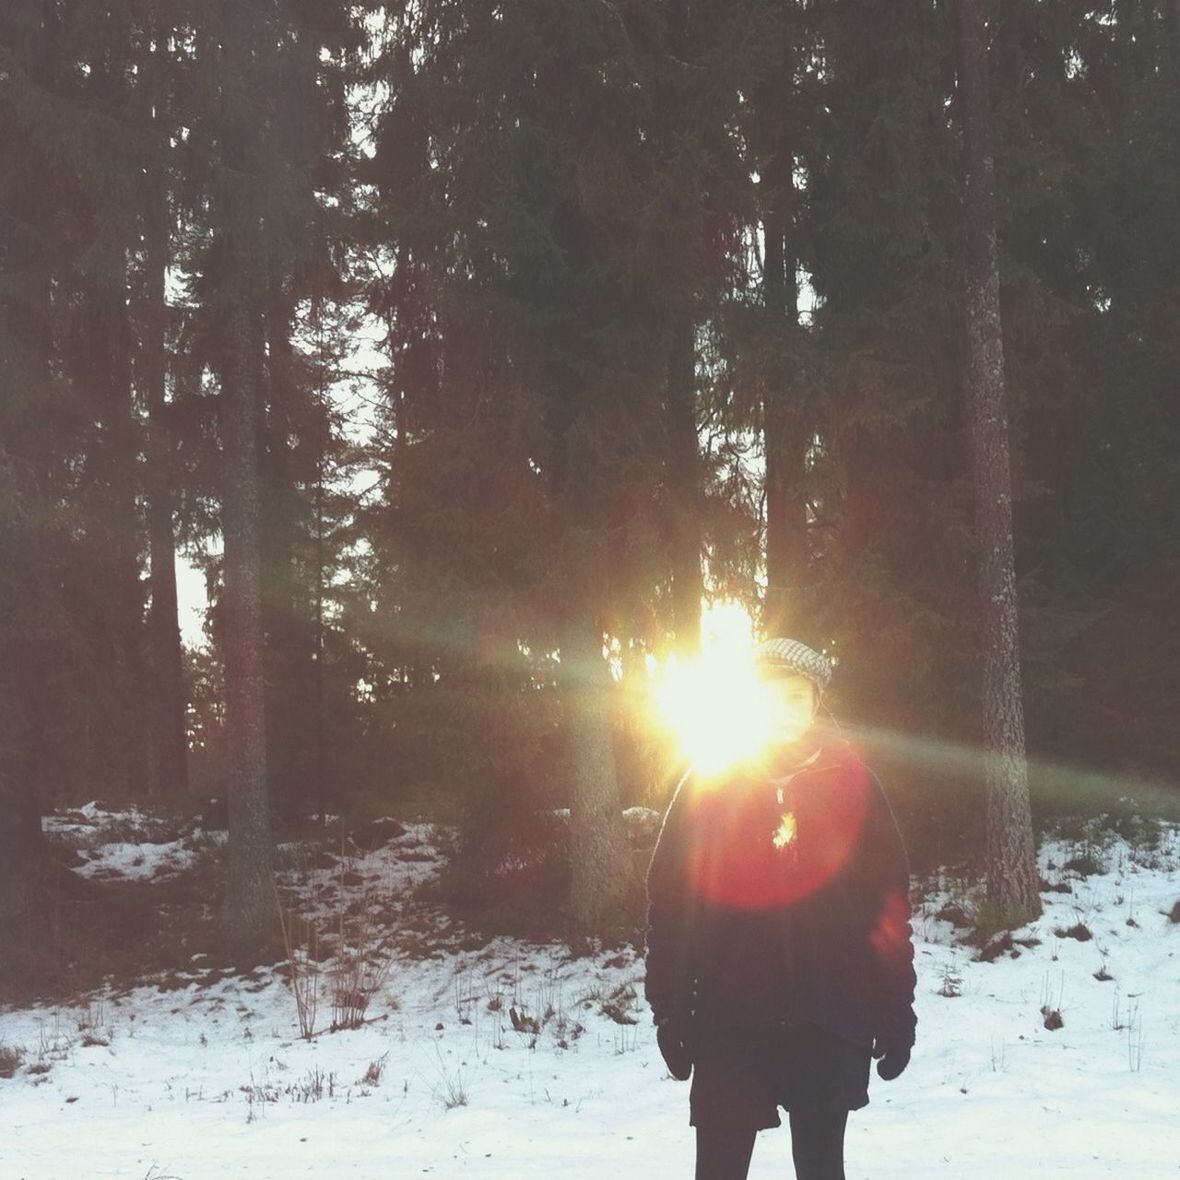 winter, snow, cold temperature, season, lifestyles, standing, leisure activity, rear view, weather, walking, sun, warm clothing, tree, field, sunlight, full length, nature, lens flare